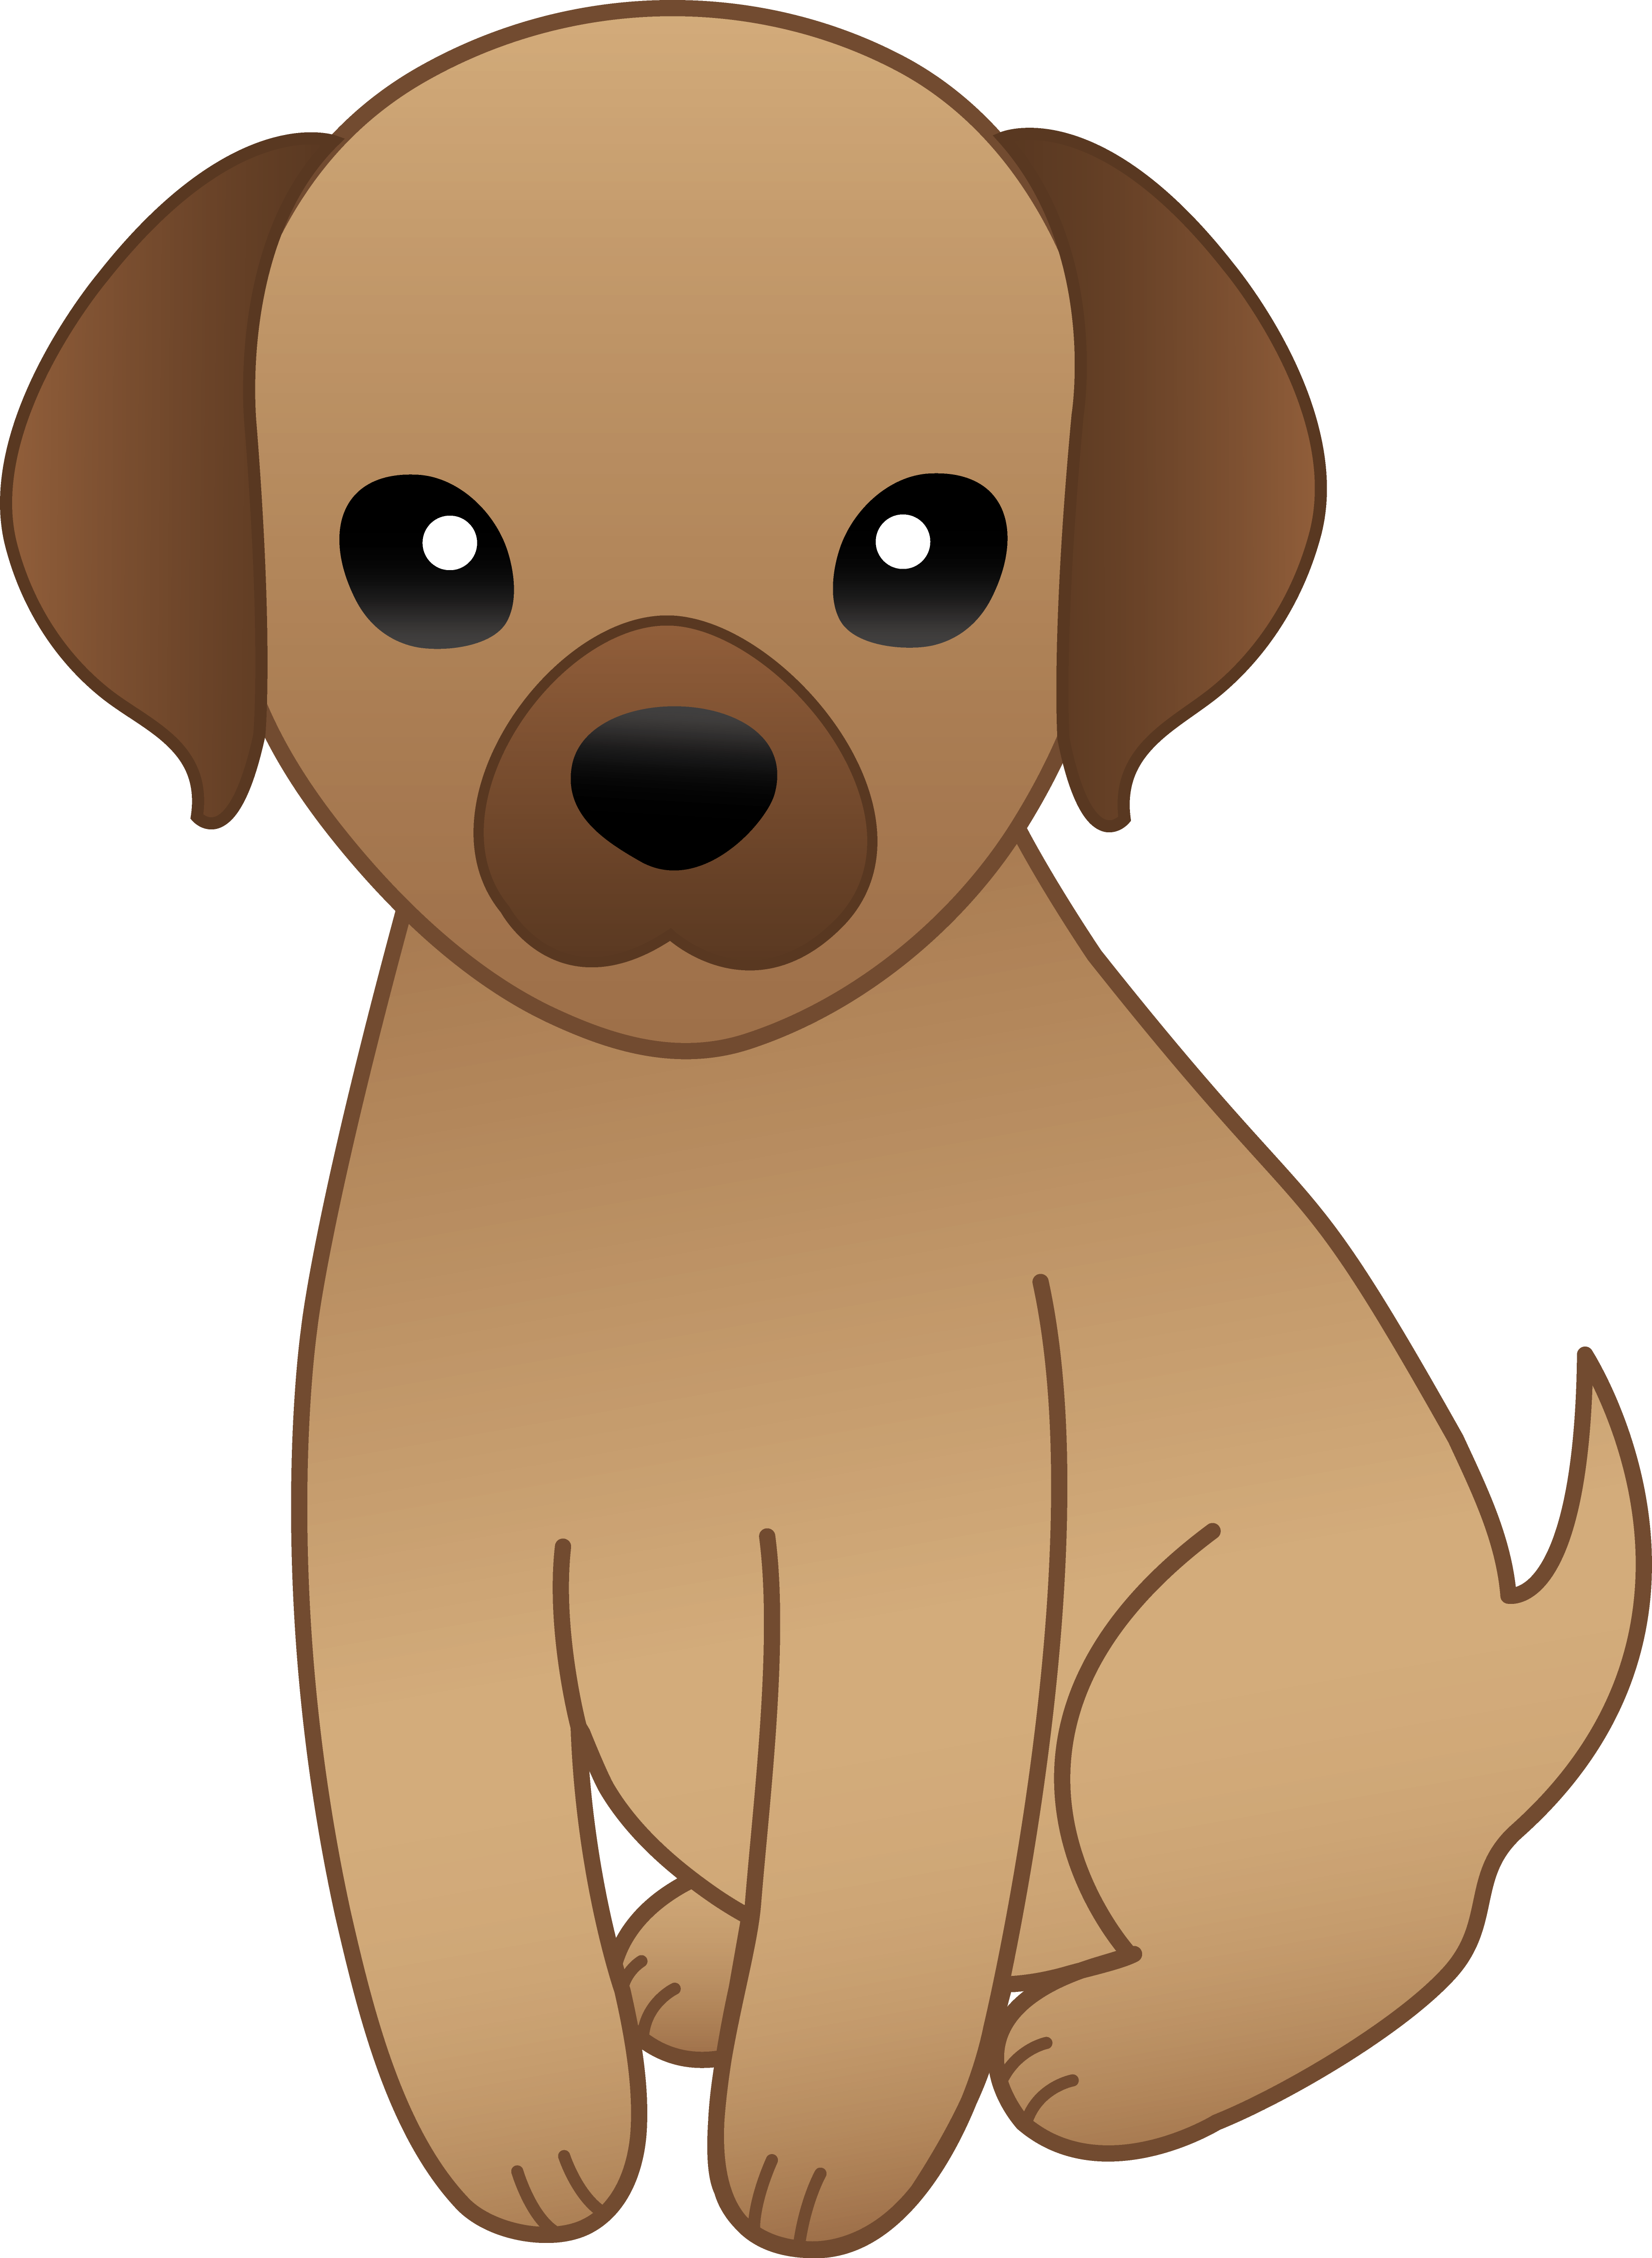 Images For > Cute Puppy Face Clip Art